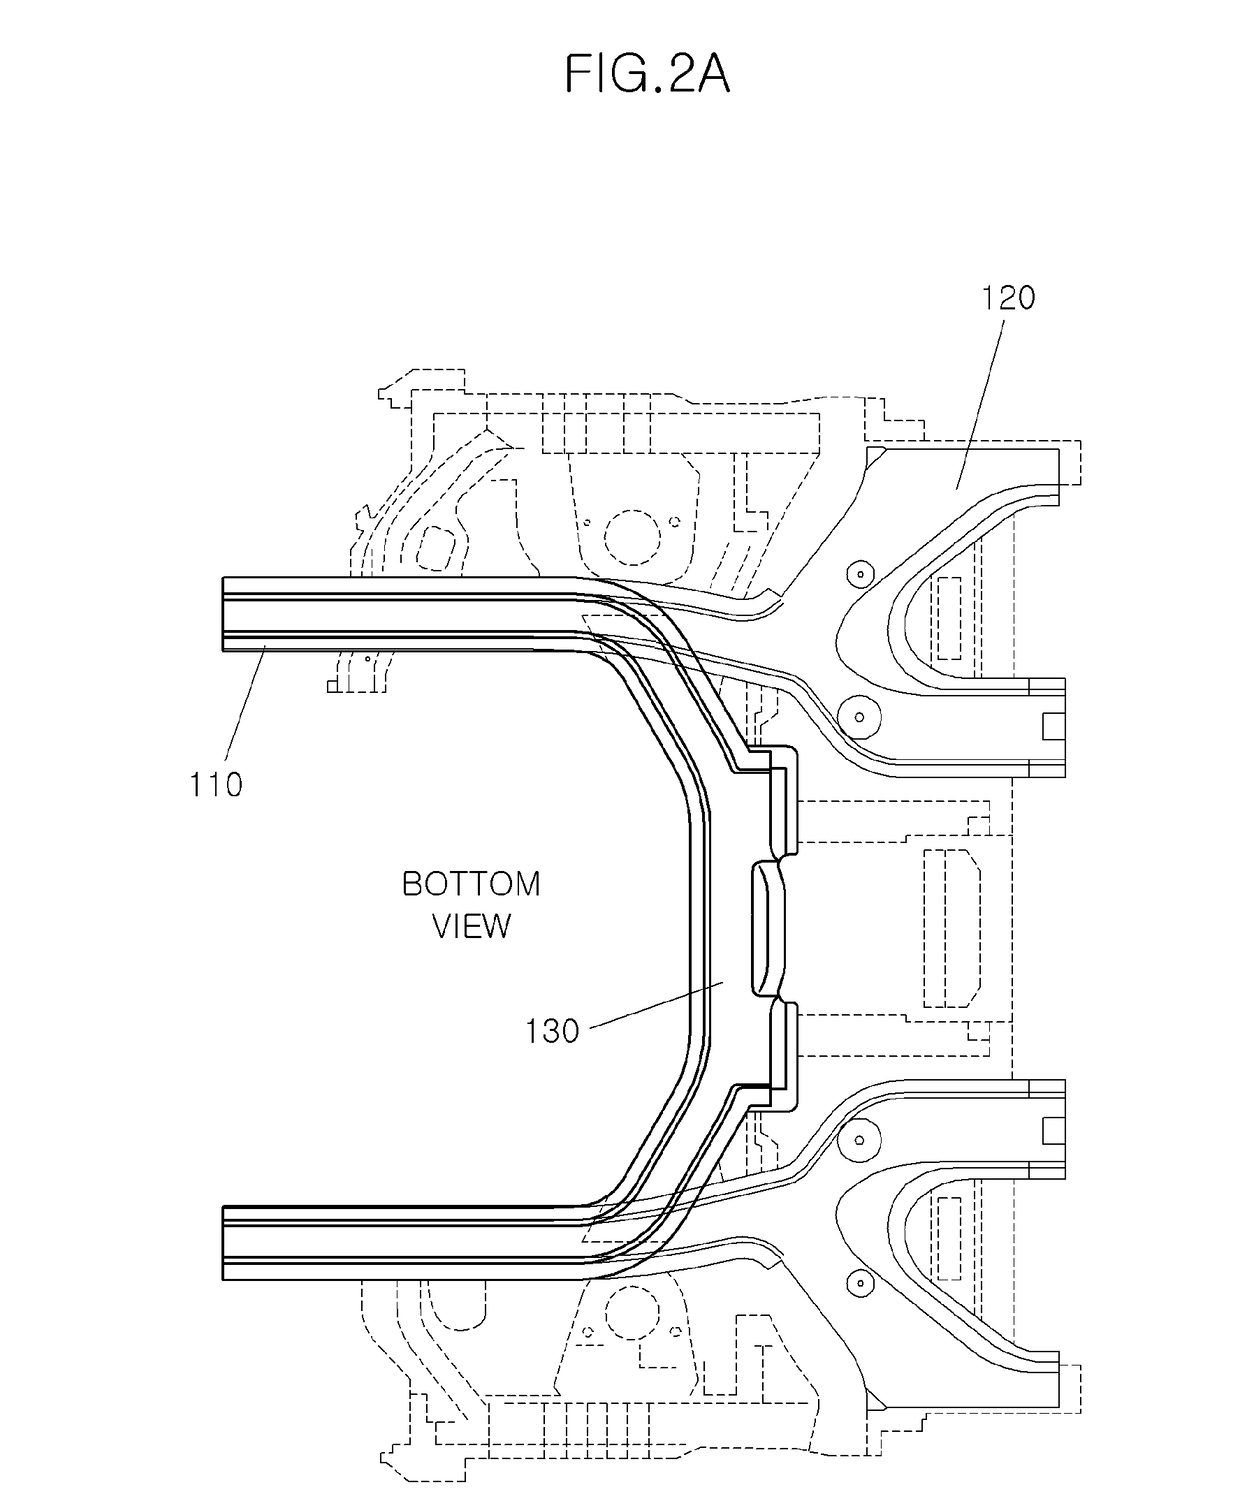 Integrated side member with impact absorbing structure